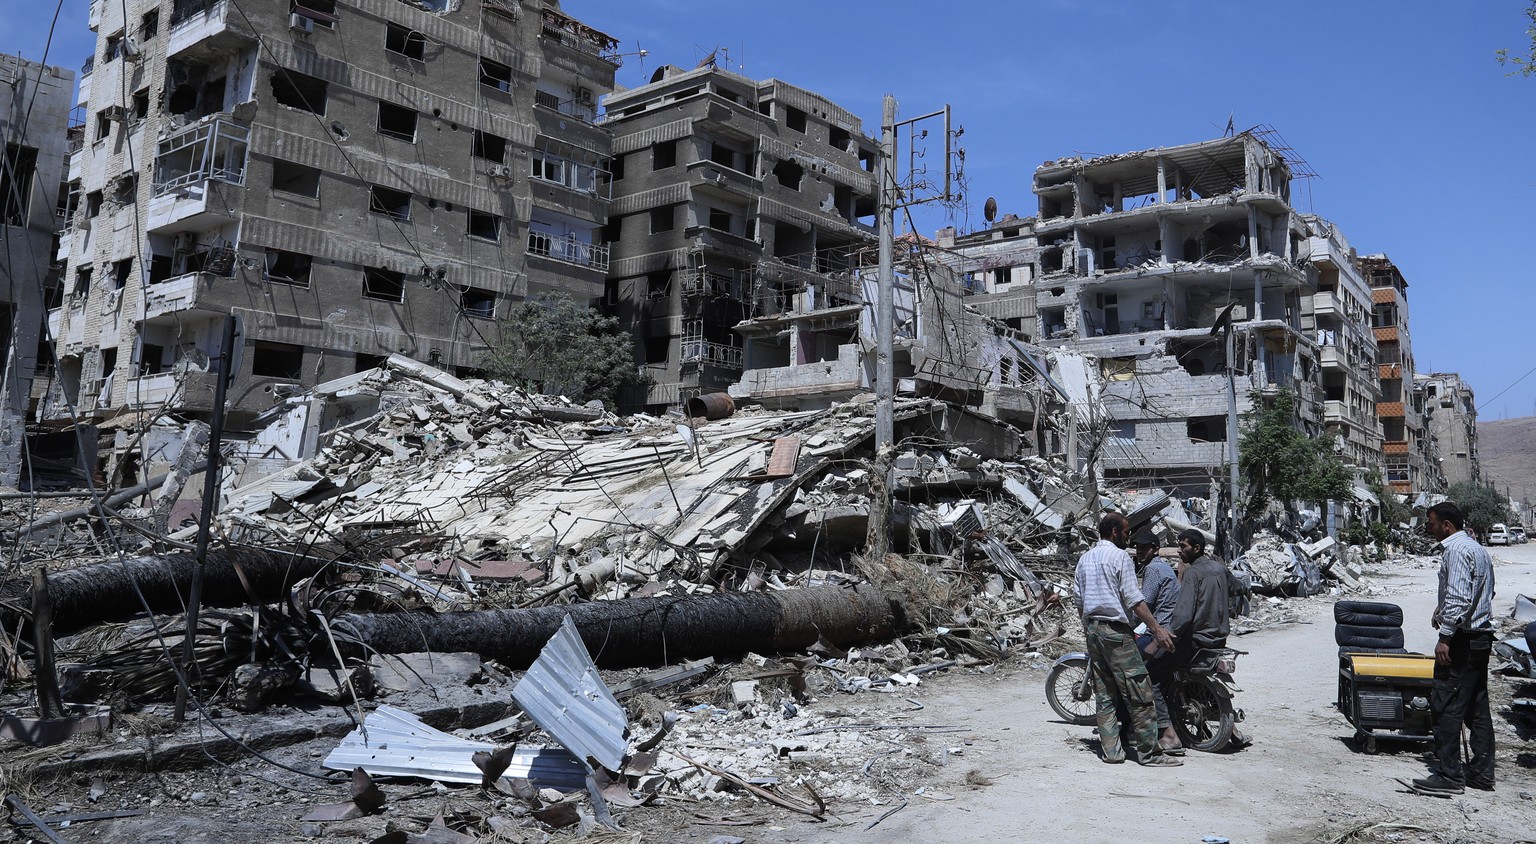 FILE - In this Monday, April 16, 2018 file photo, people stand in front of damaged buildings, in the town of Douma, the site of a suspected chemical weapons attack, near Damascus, Syria. The global ch ...